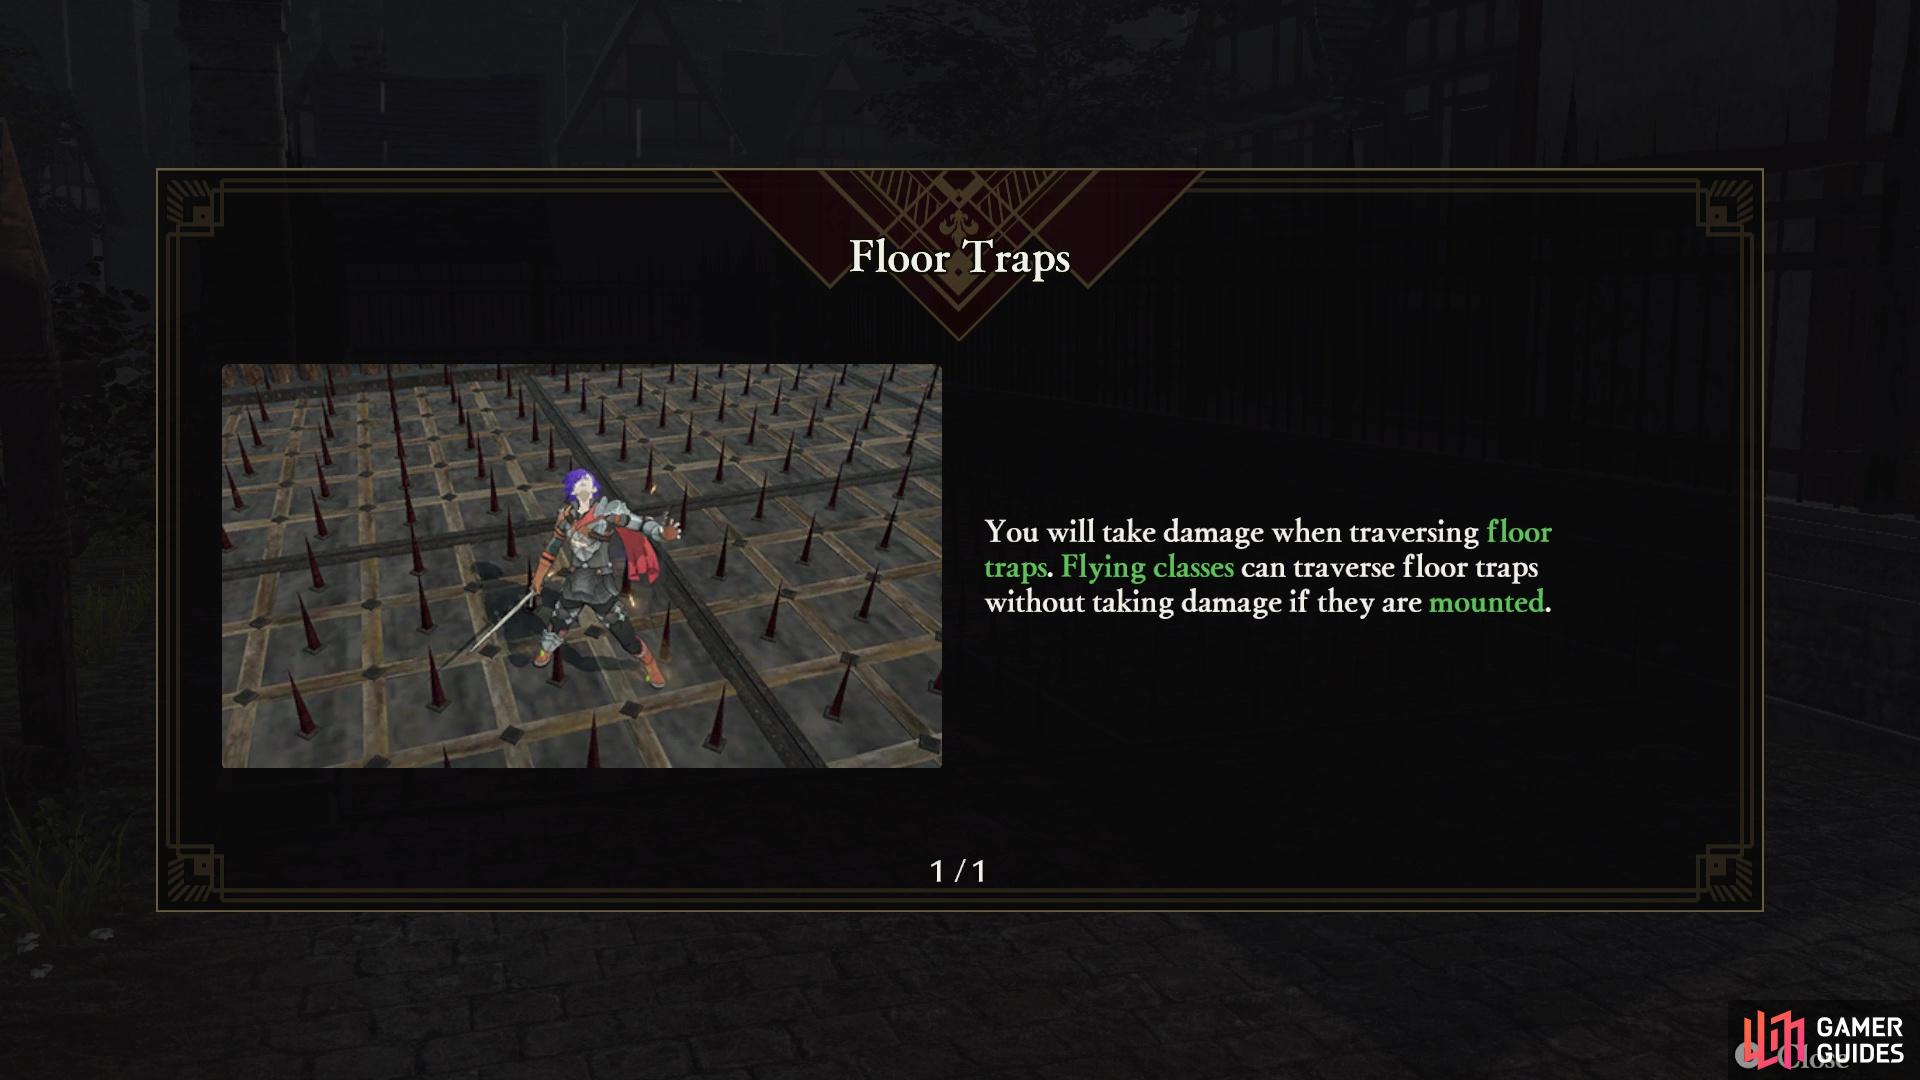 This battle will introduce floor traps to the game